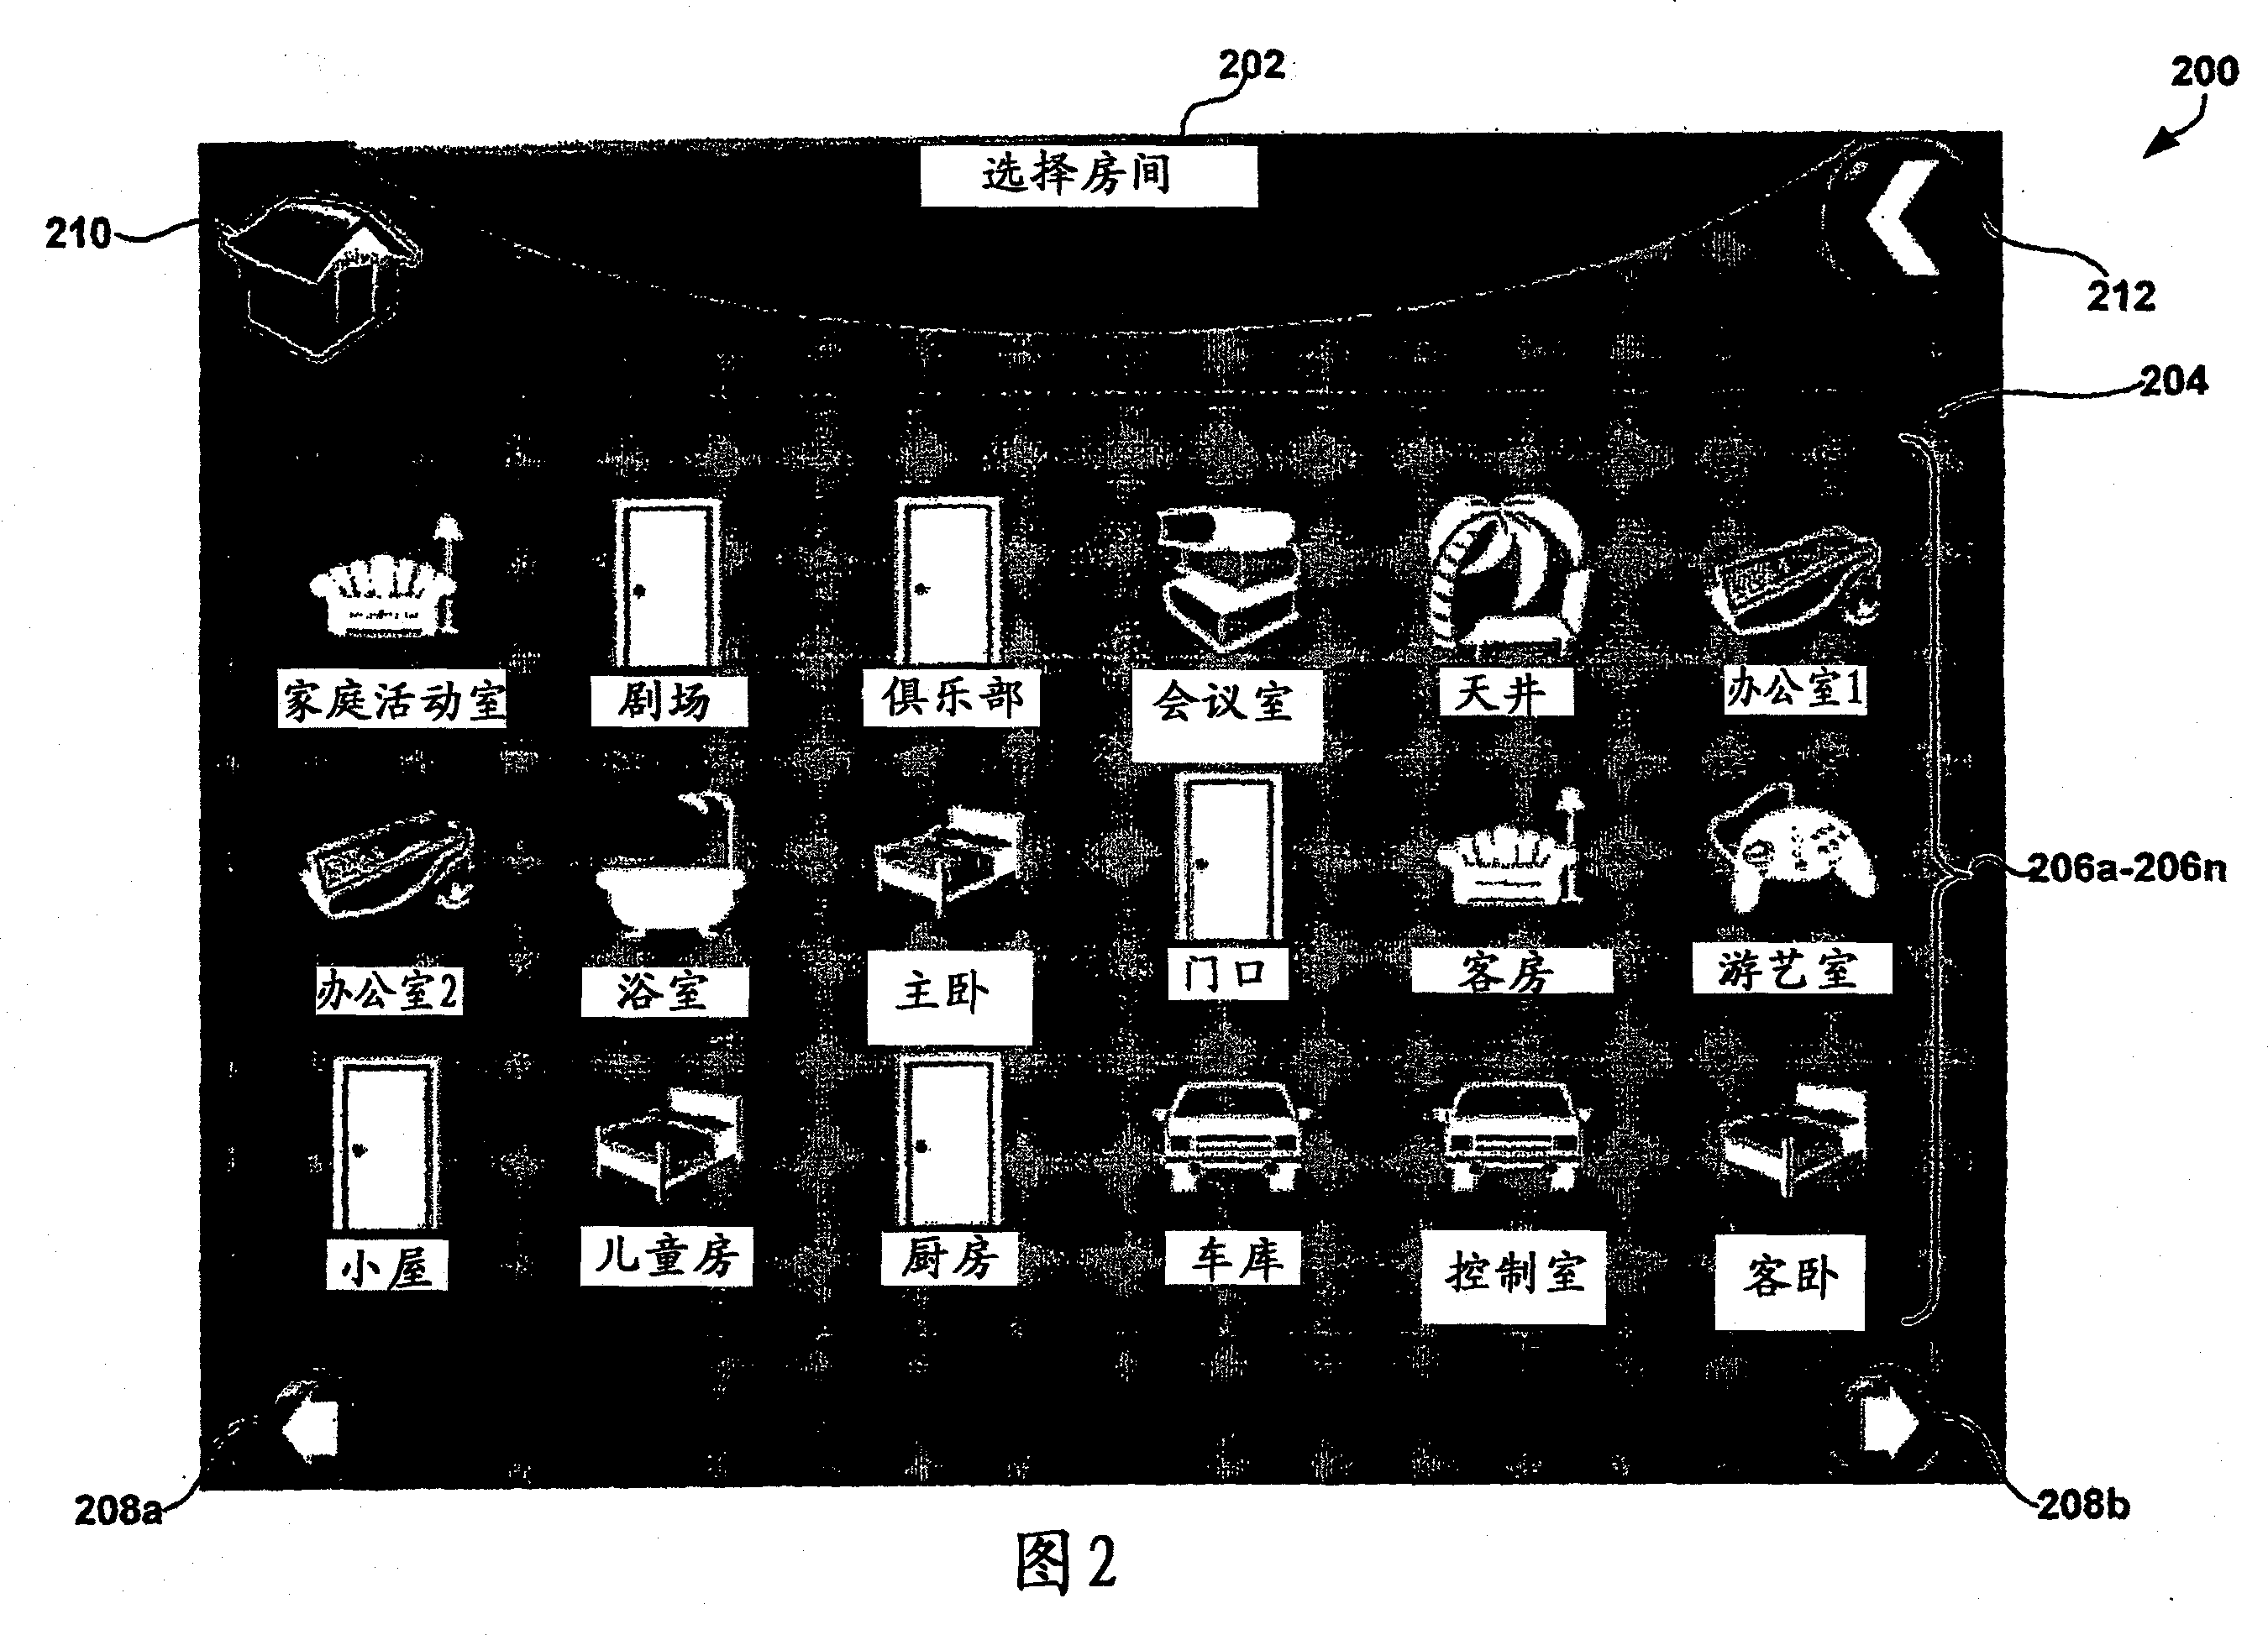 User interface for multi-device control